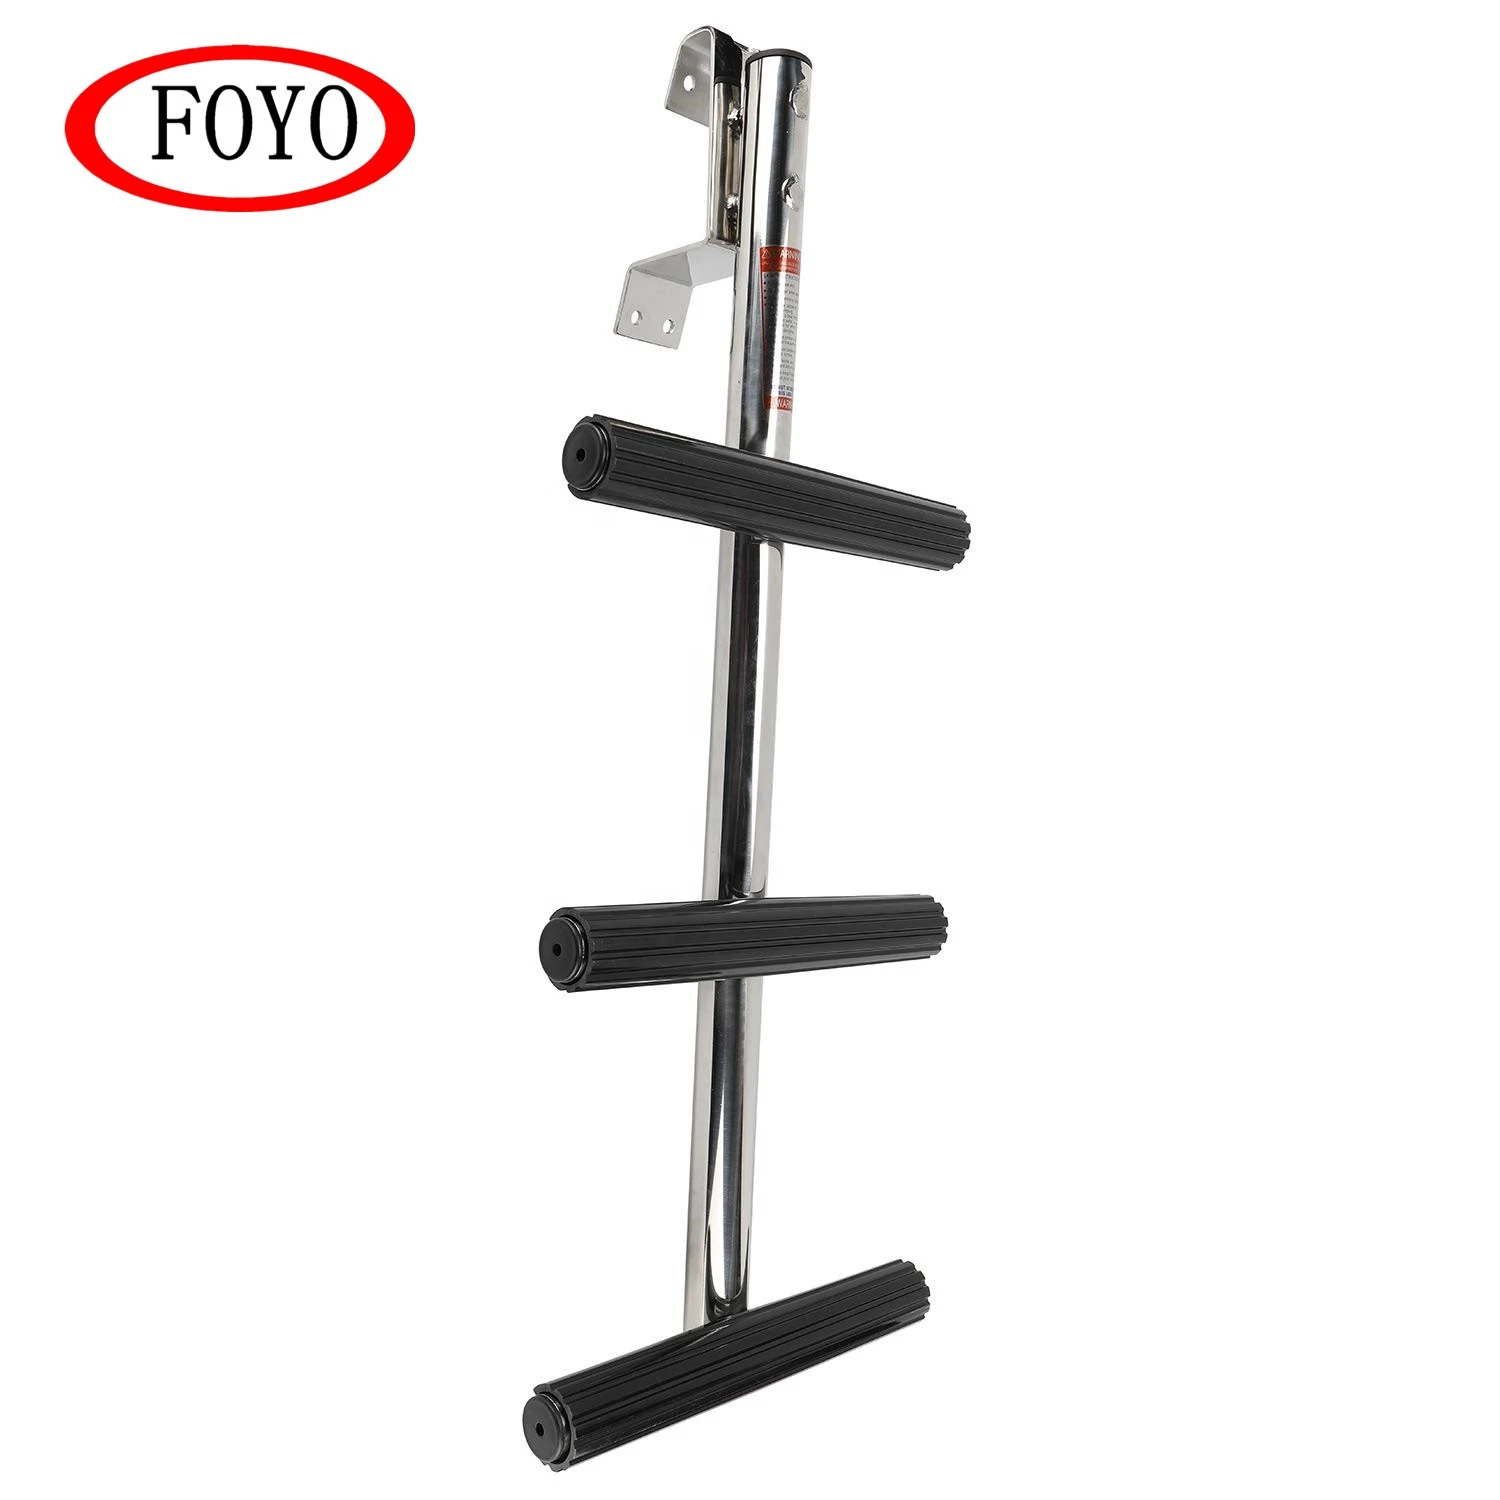 FOYO Brand Hot Sale Marine 304 Stainless Steel 3 Steps Boat Dive Ladders Telescopic Ladder for Boat and Sailboat and Yacht